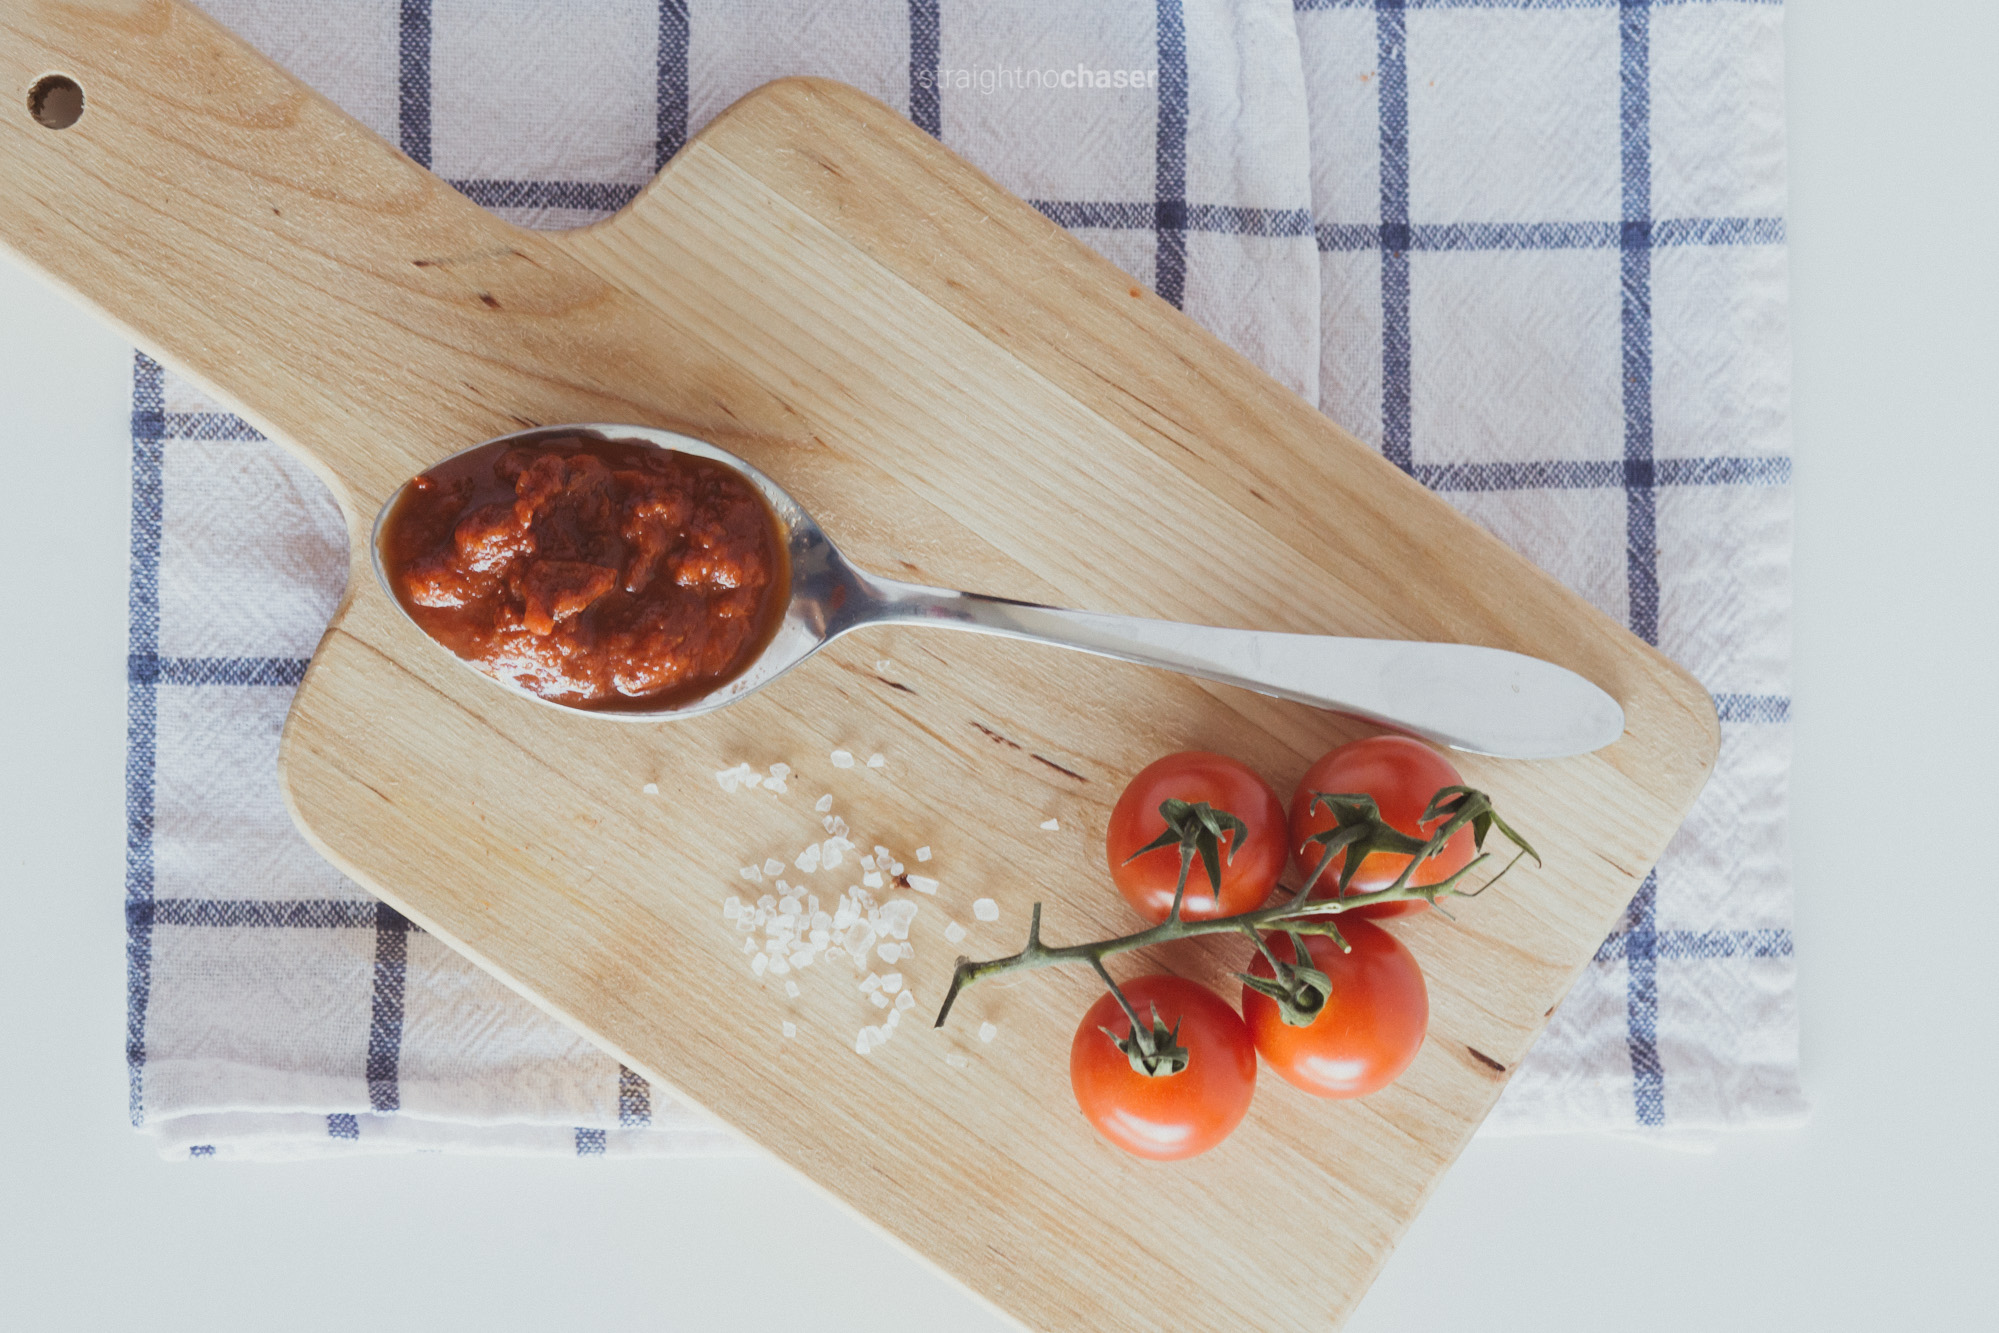 Fresh preservative- free tomato sauces from Pasta People